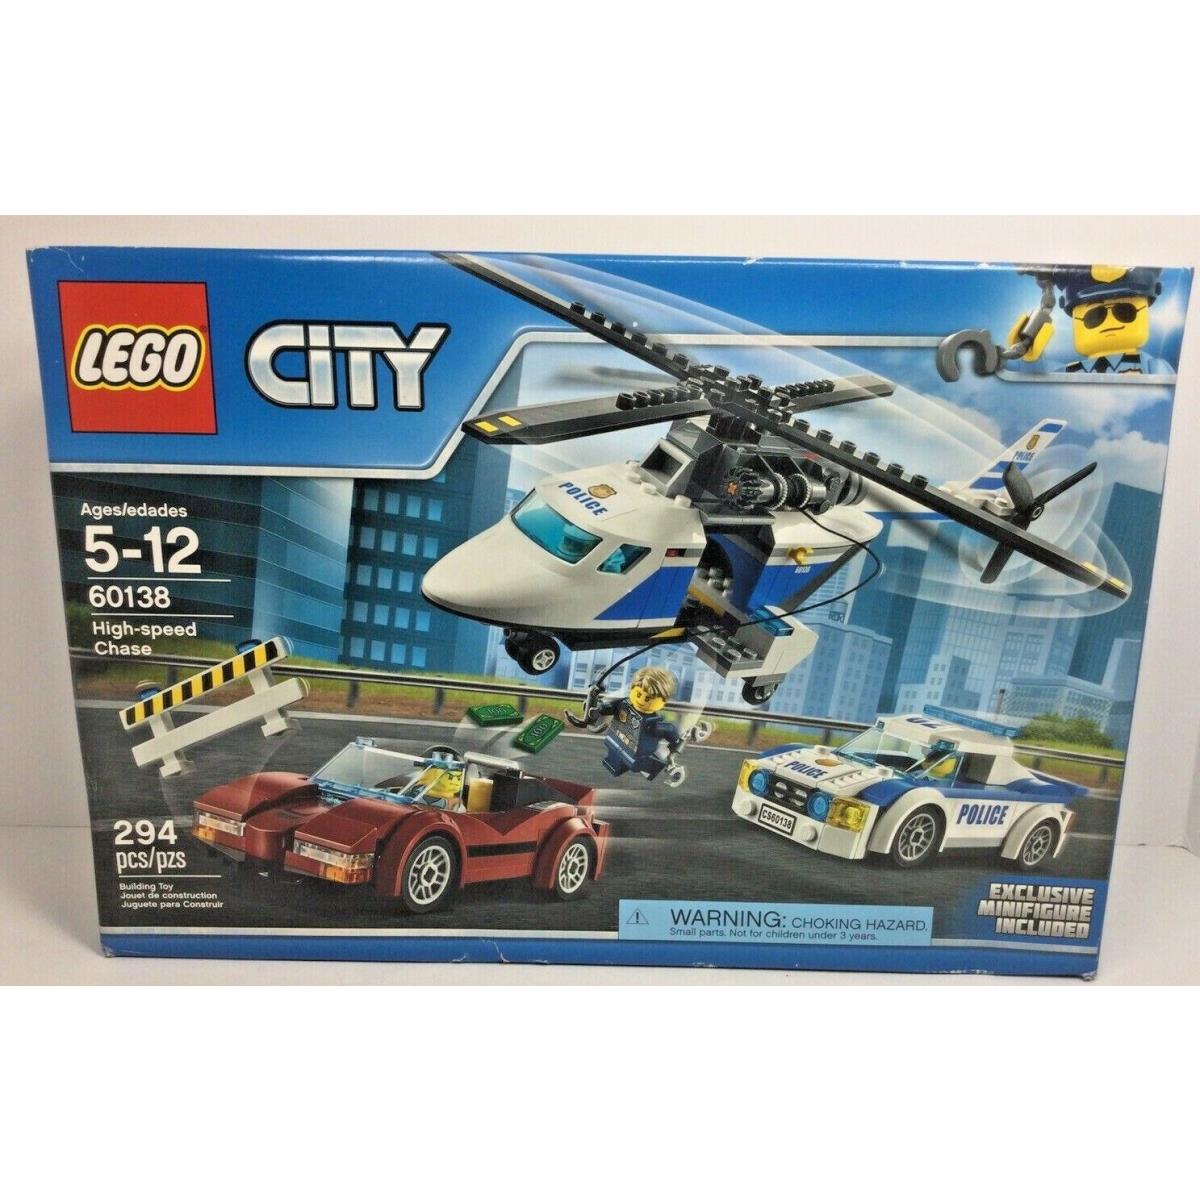 Lego City 60138 High-speed Chase Some Shelf Wear Nice Fast